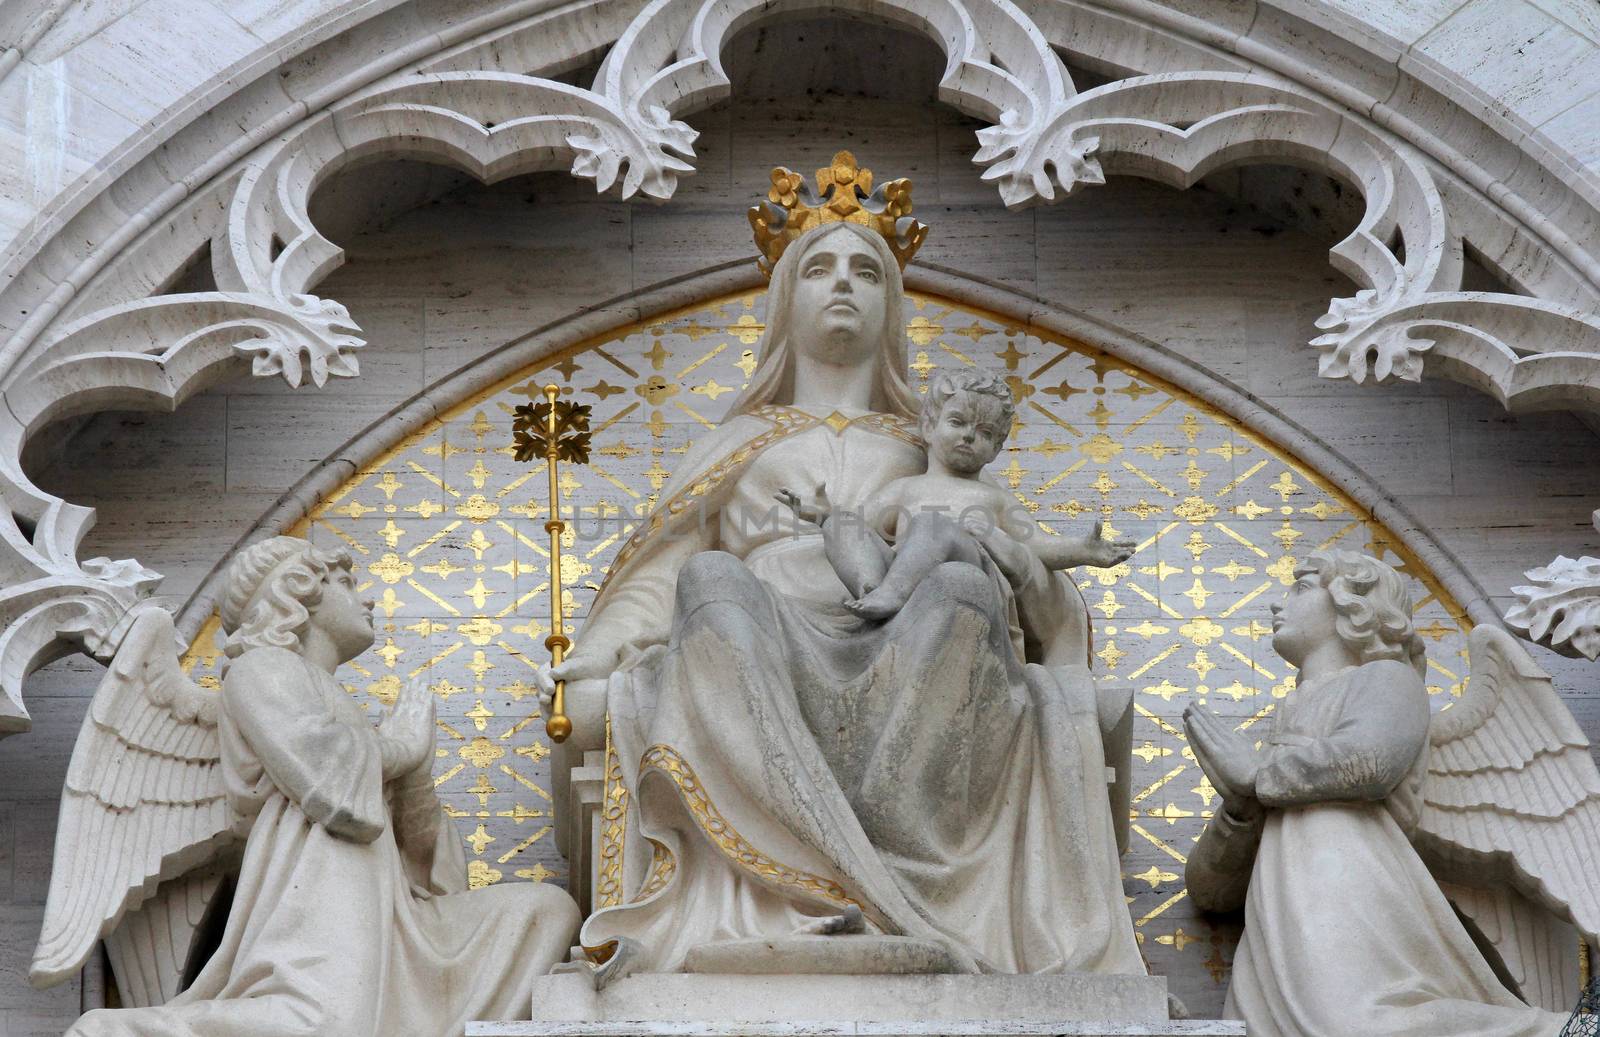 Statue of Madonna on the throne with the Child Jesus and two angels on the portal of the cathedral dedicated to the Assumption of Mary and to kings Saint Stephen and Saint Ladislaus in Zagreb on Sept 26, 2013.